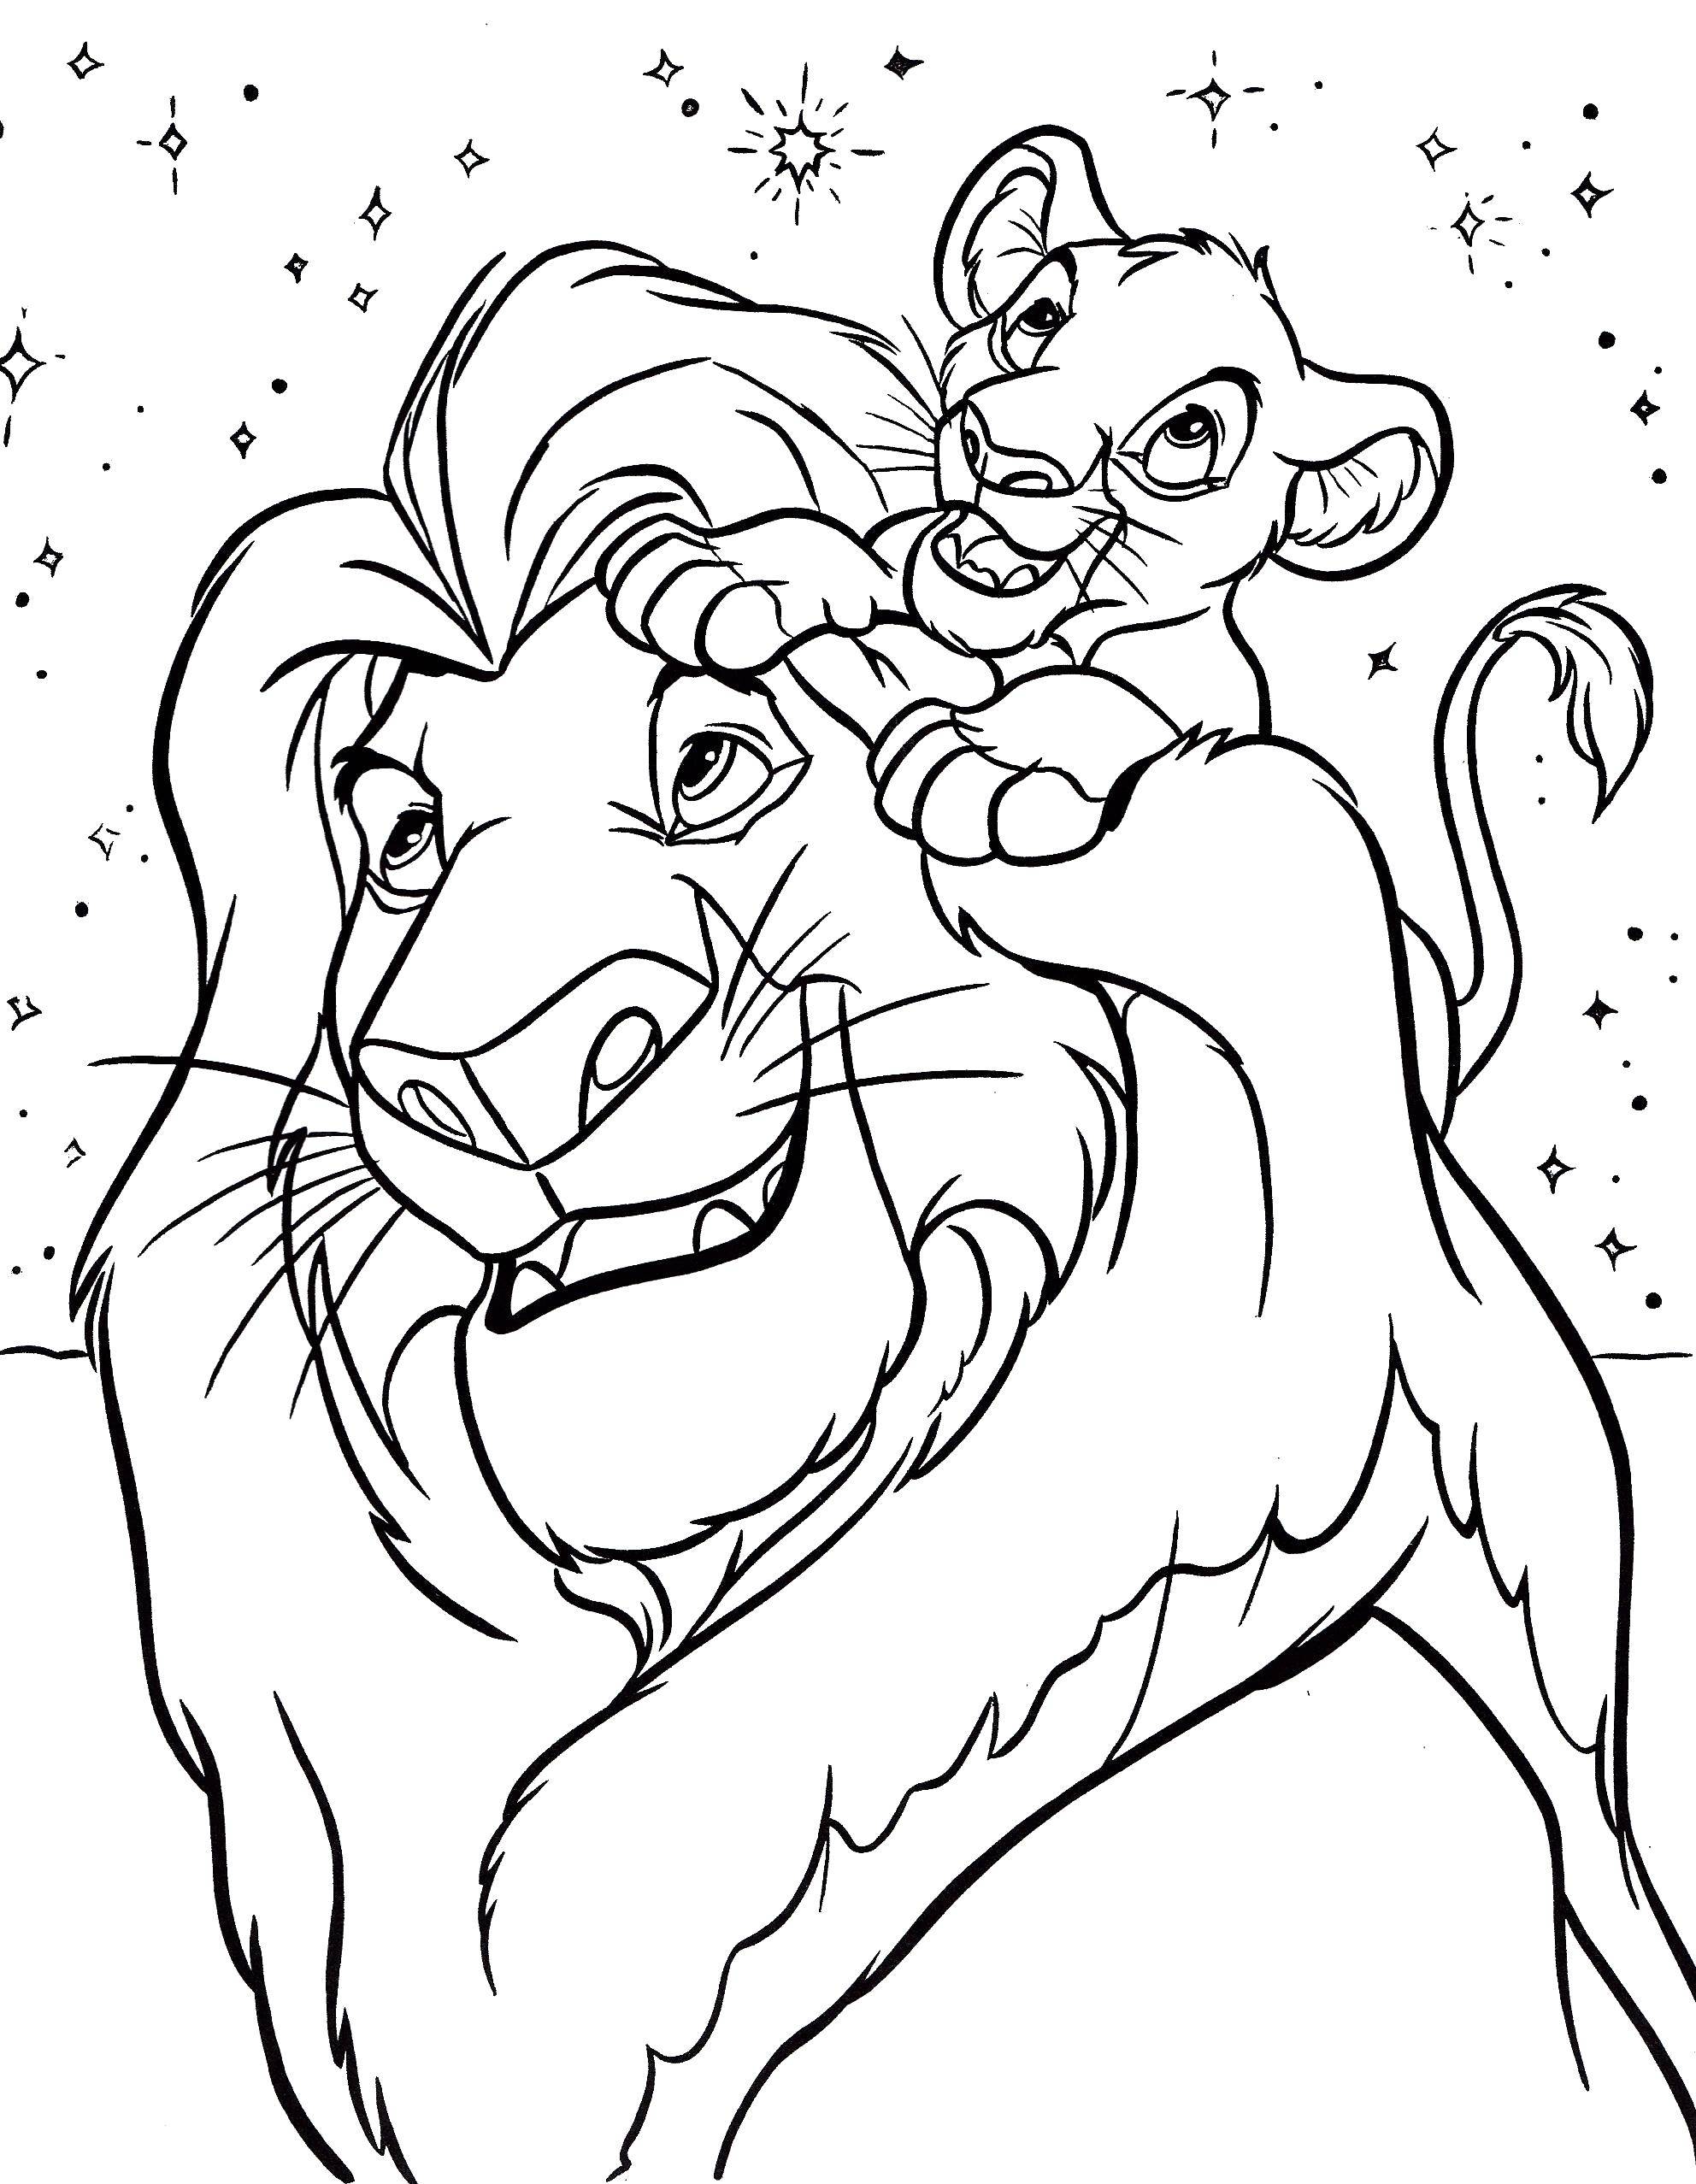 Coloring The lion king. Category Disney coloring pages. Tags:  Disney, Lion King.